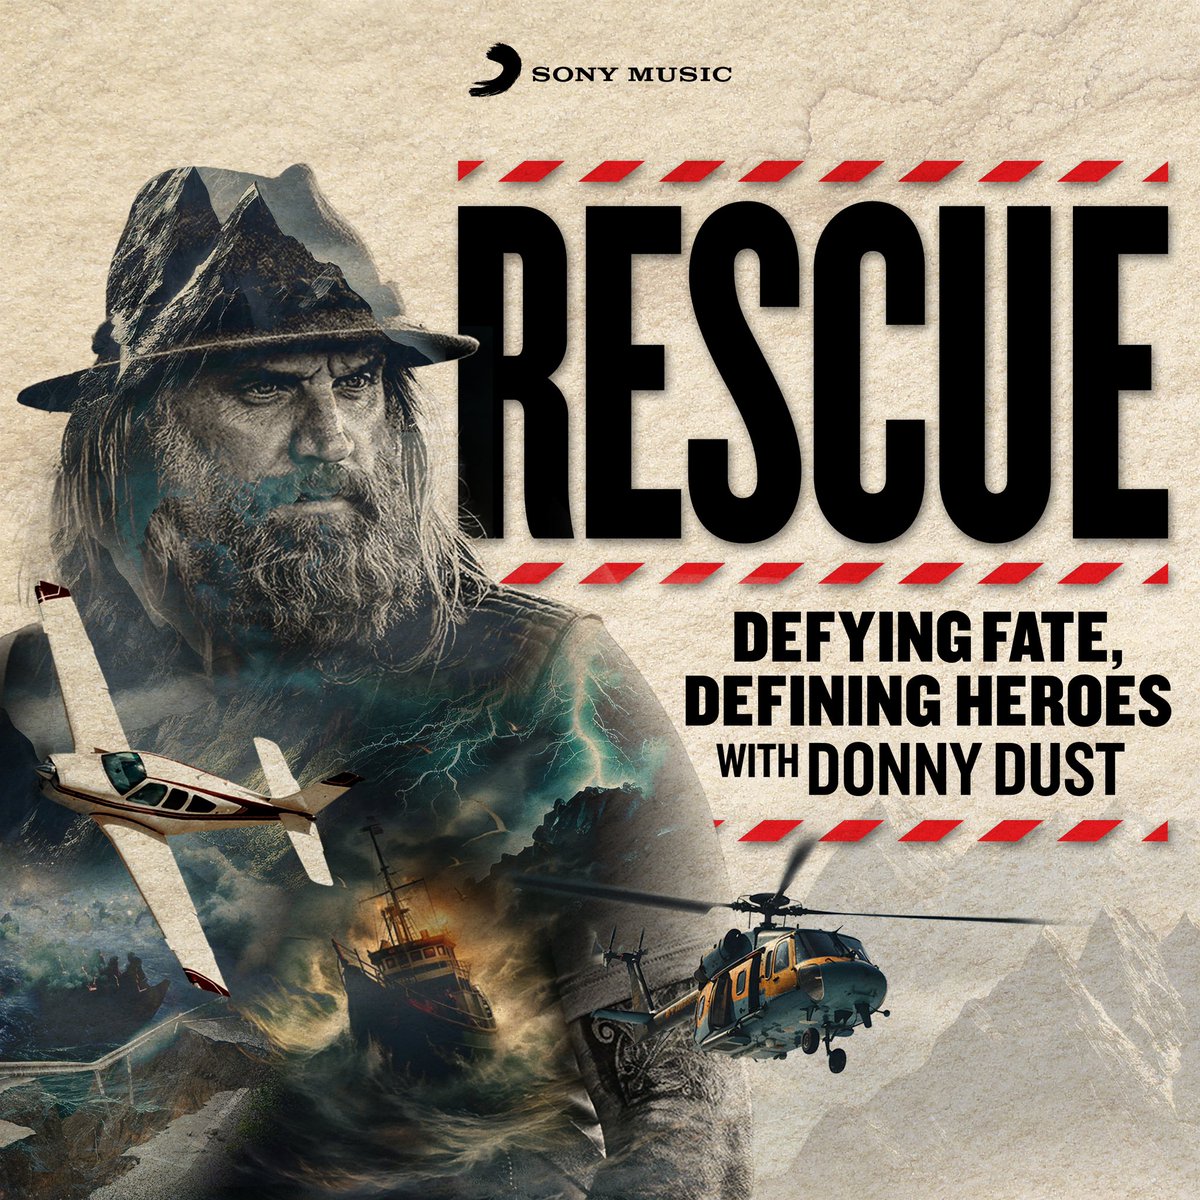 Launching on October 10th, each episode unveils the untold stories of remarkable rescue missions from around the world. Stay tuned for a celebration of humanity's indomitable spirit! 

#Rescuepodcast #HeroesUnveiled #DonnyDust